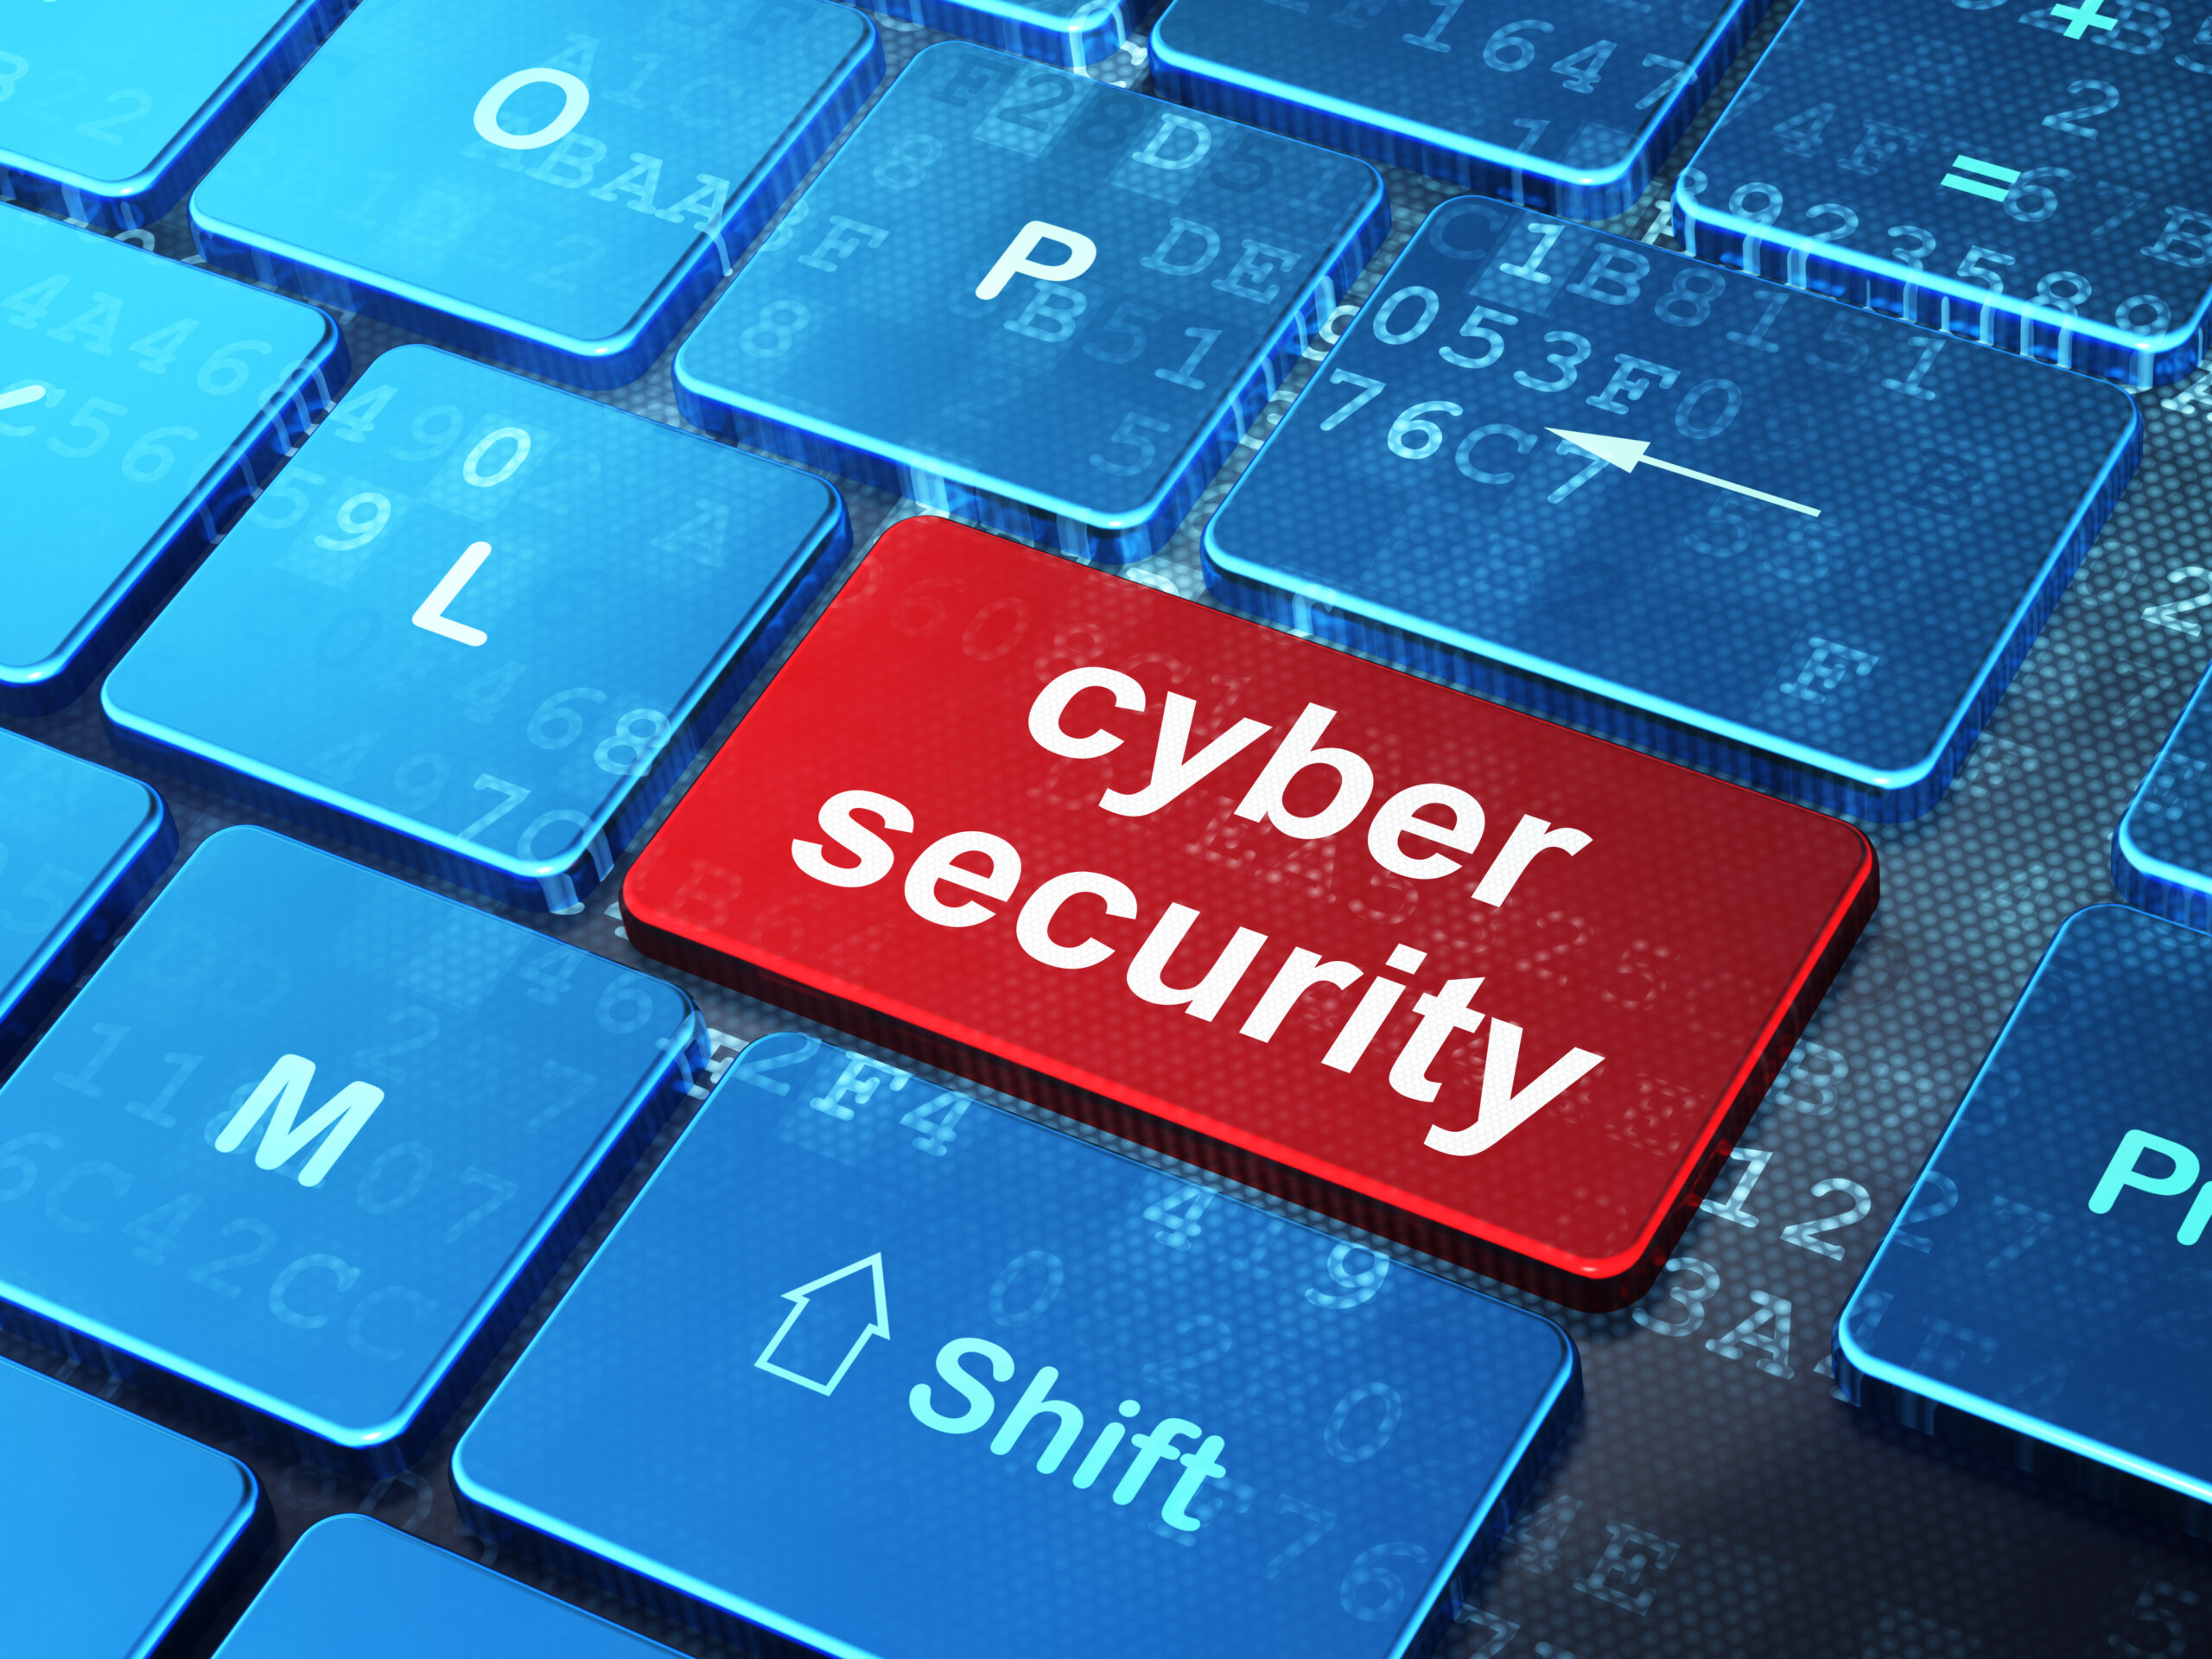 Cyber Security in Ghana: Talk or Action?